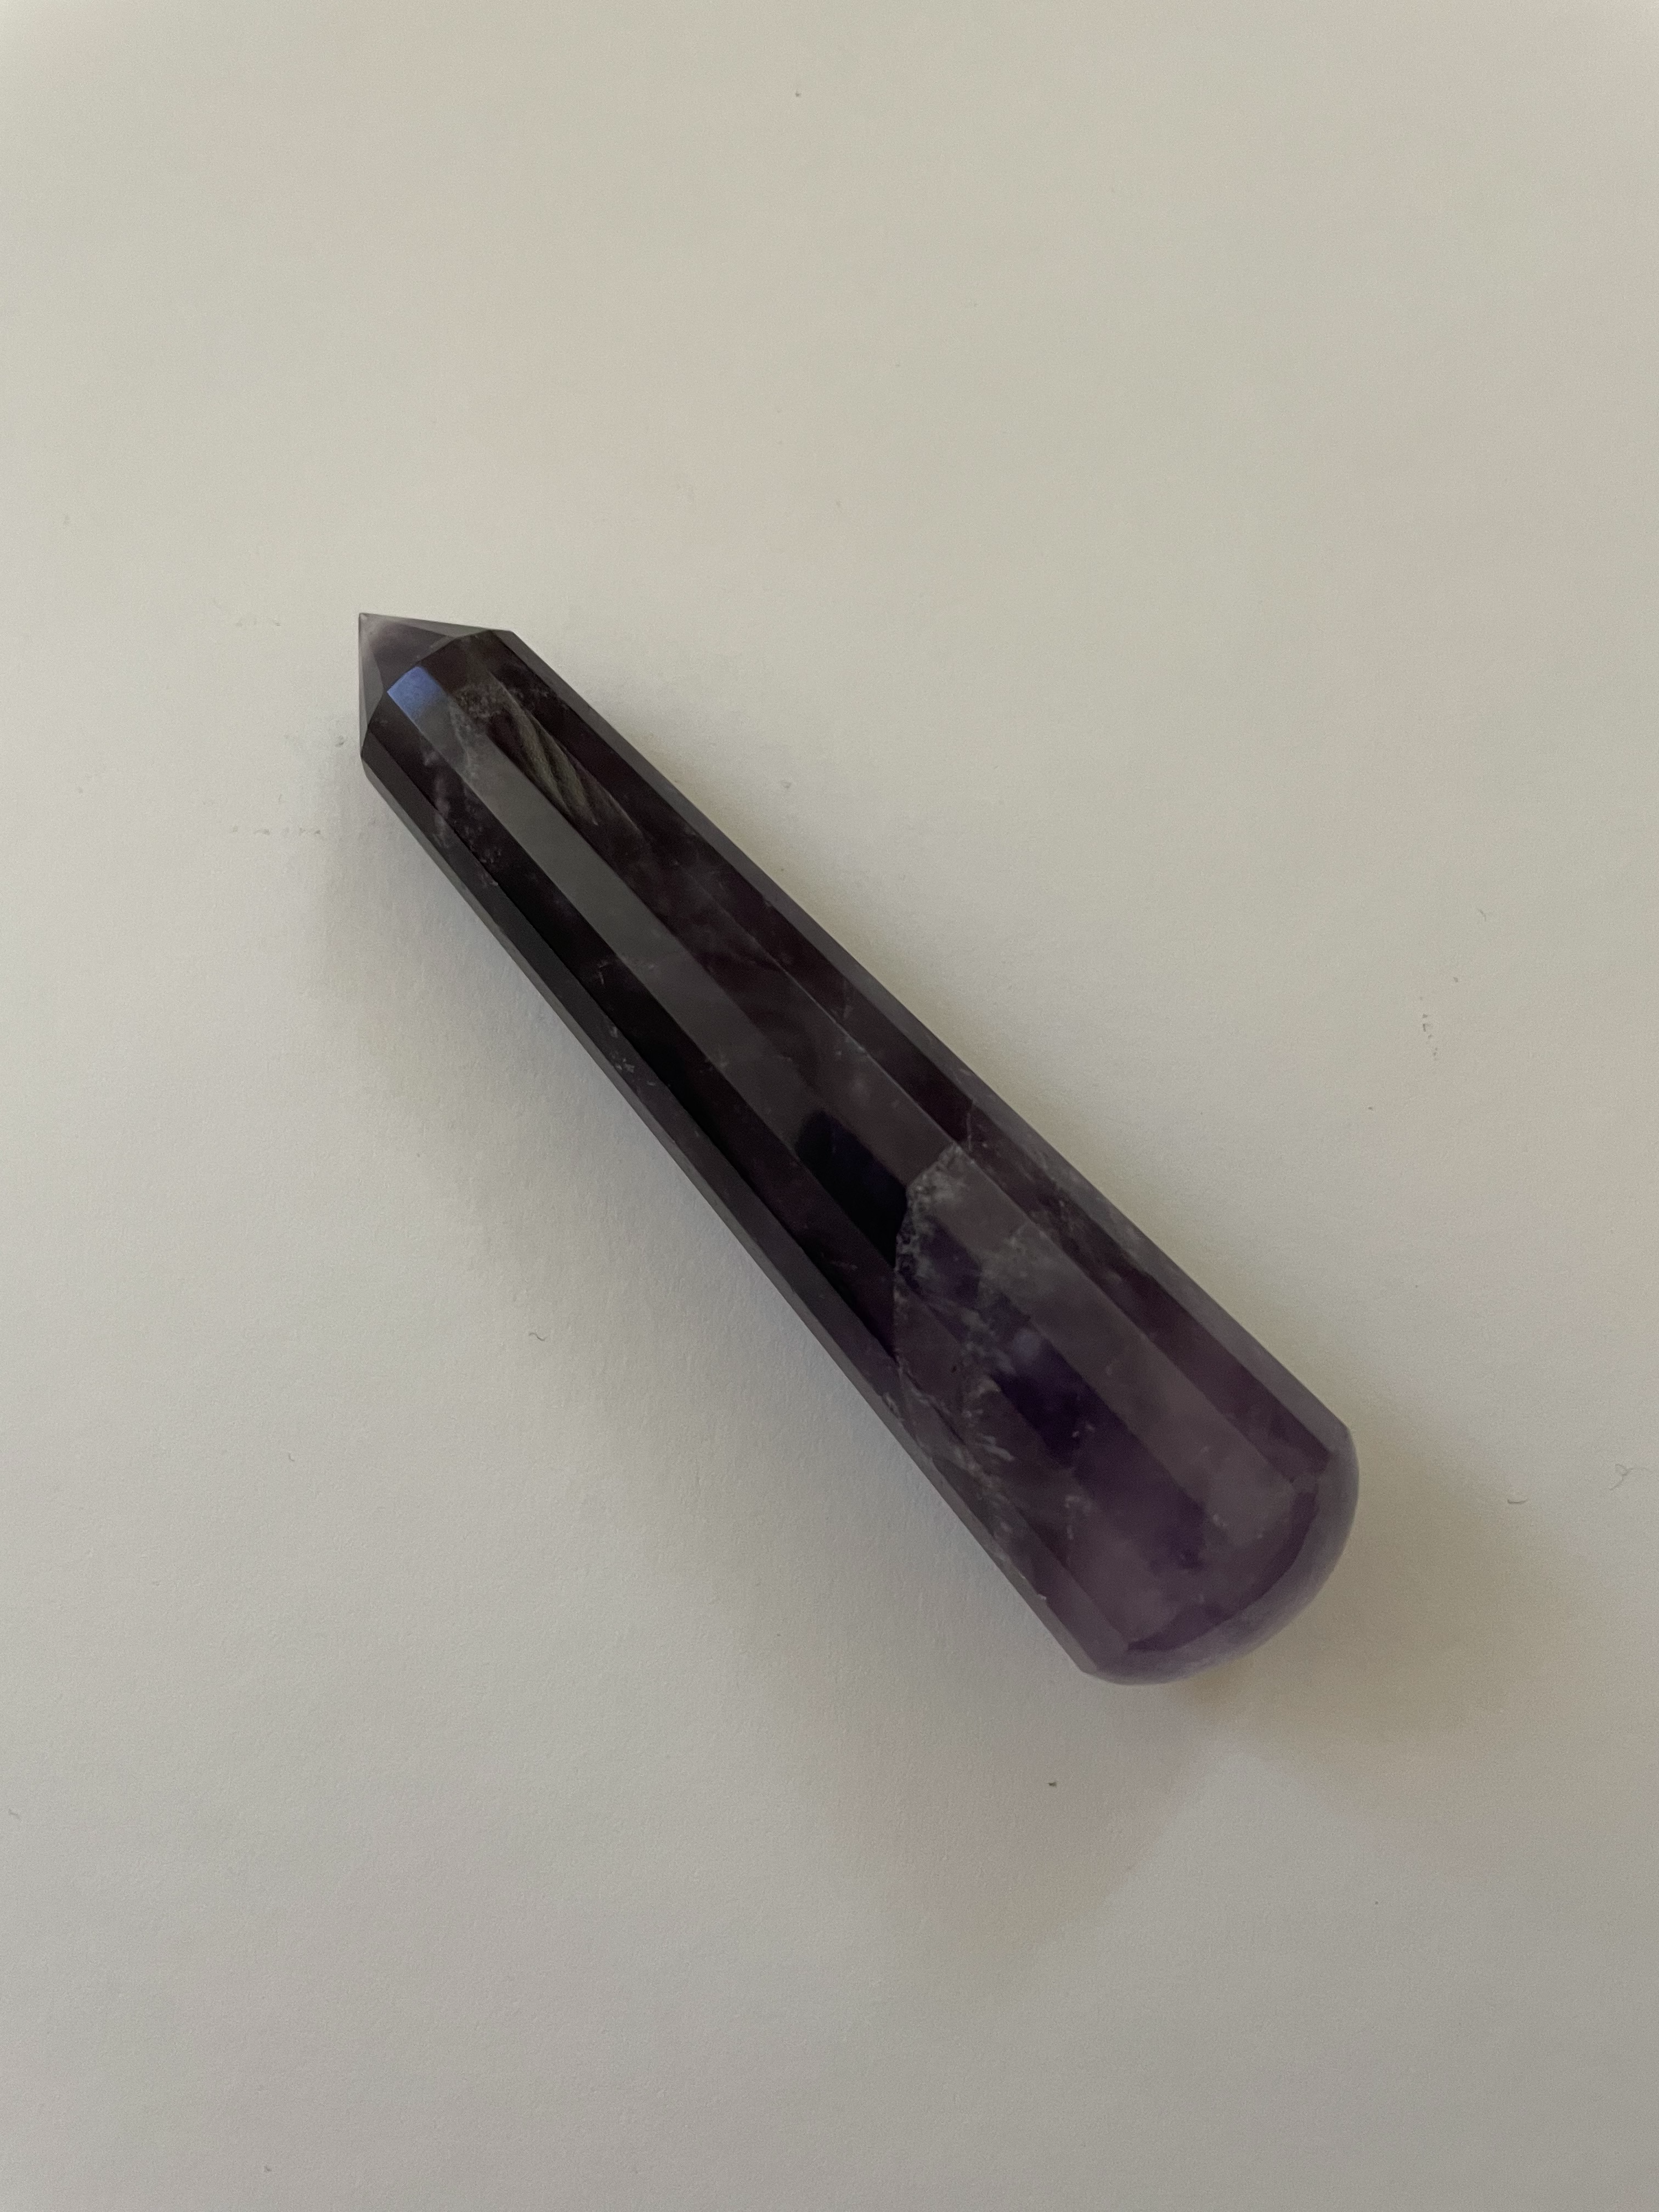 Alternate view. Gorgeous, 16-sided amethyst healing wand, with stunning craftsmanship. This high quality, deep purple amethyst wand can be used for healing and works especially well for "people recovering from any type of poor health - emotional, mental, physical or spiritual "and can aid in finding one's true path (ravenscrystals.com). It is approx. 3¾" long. Cost is $30.